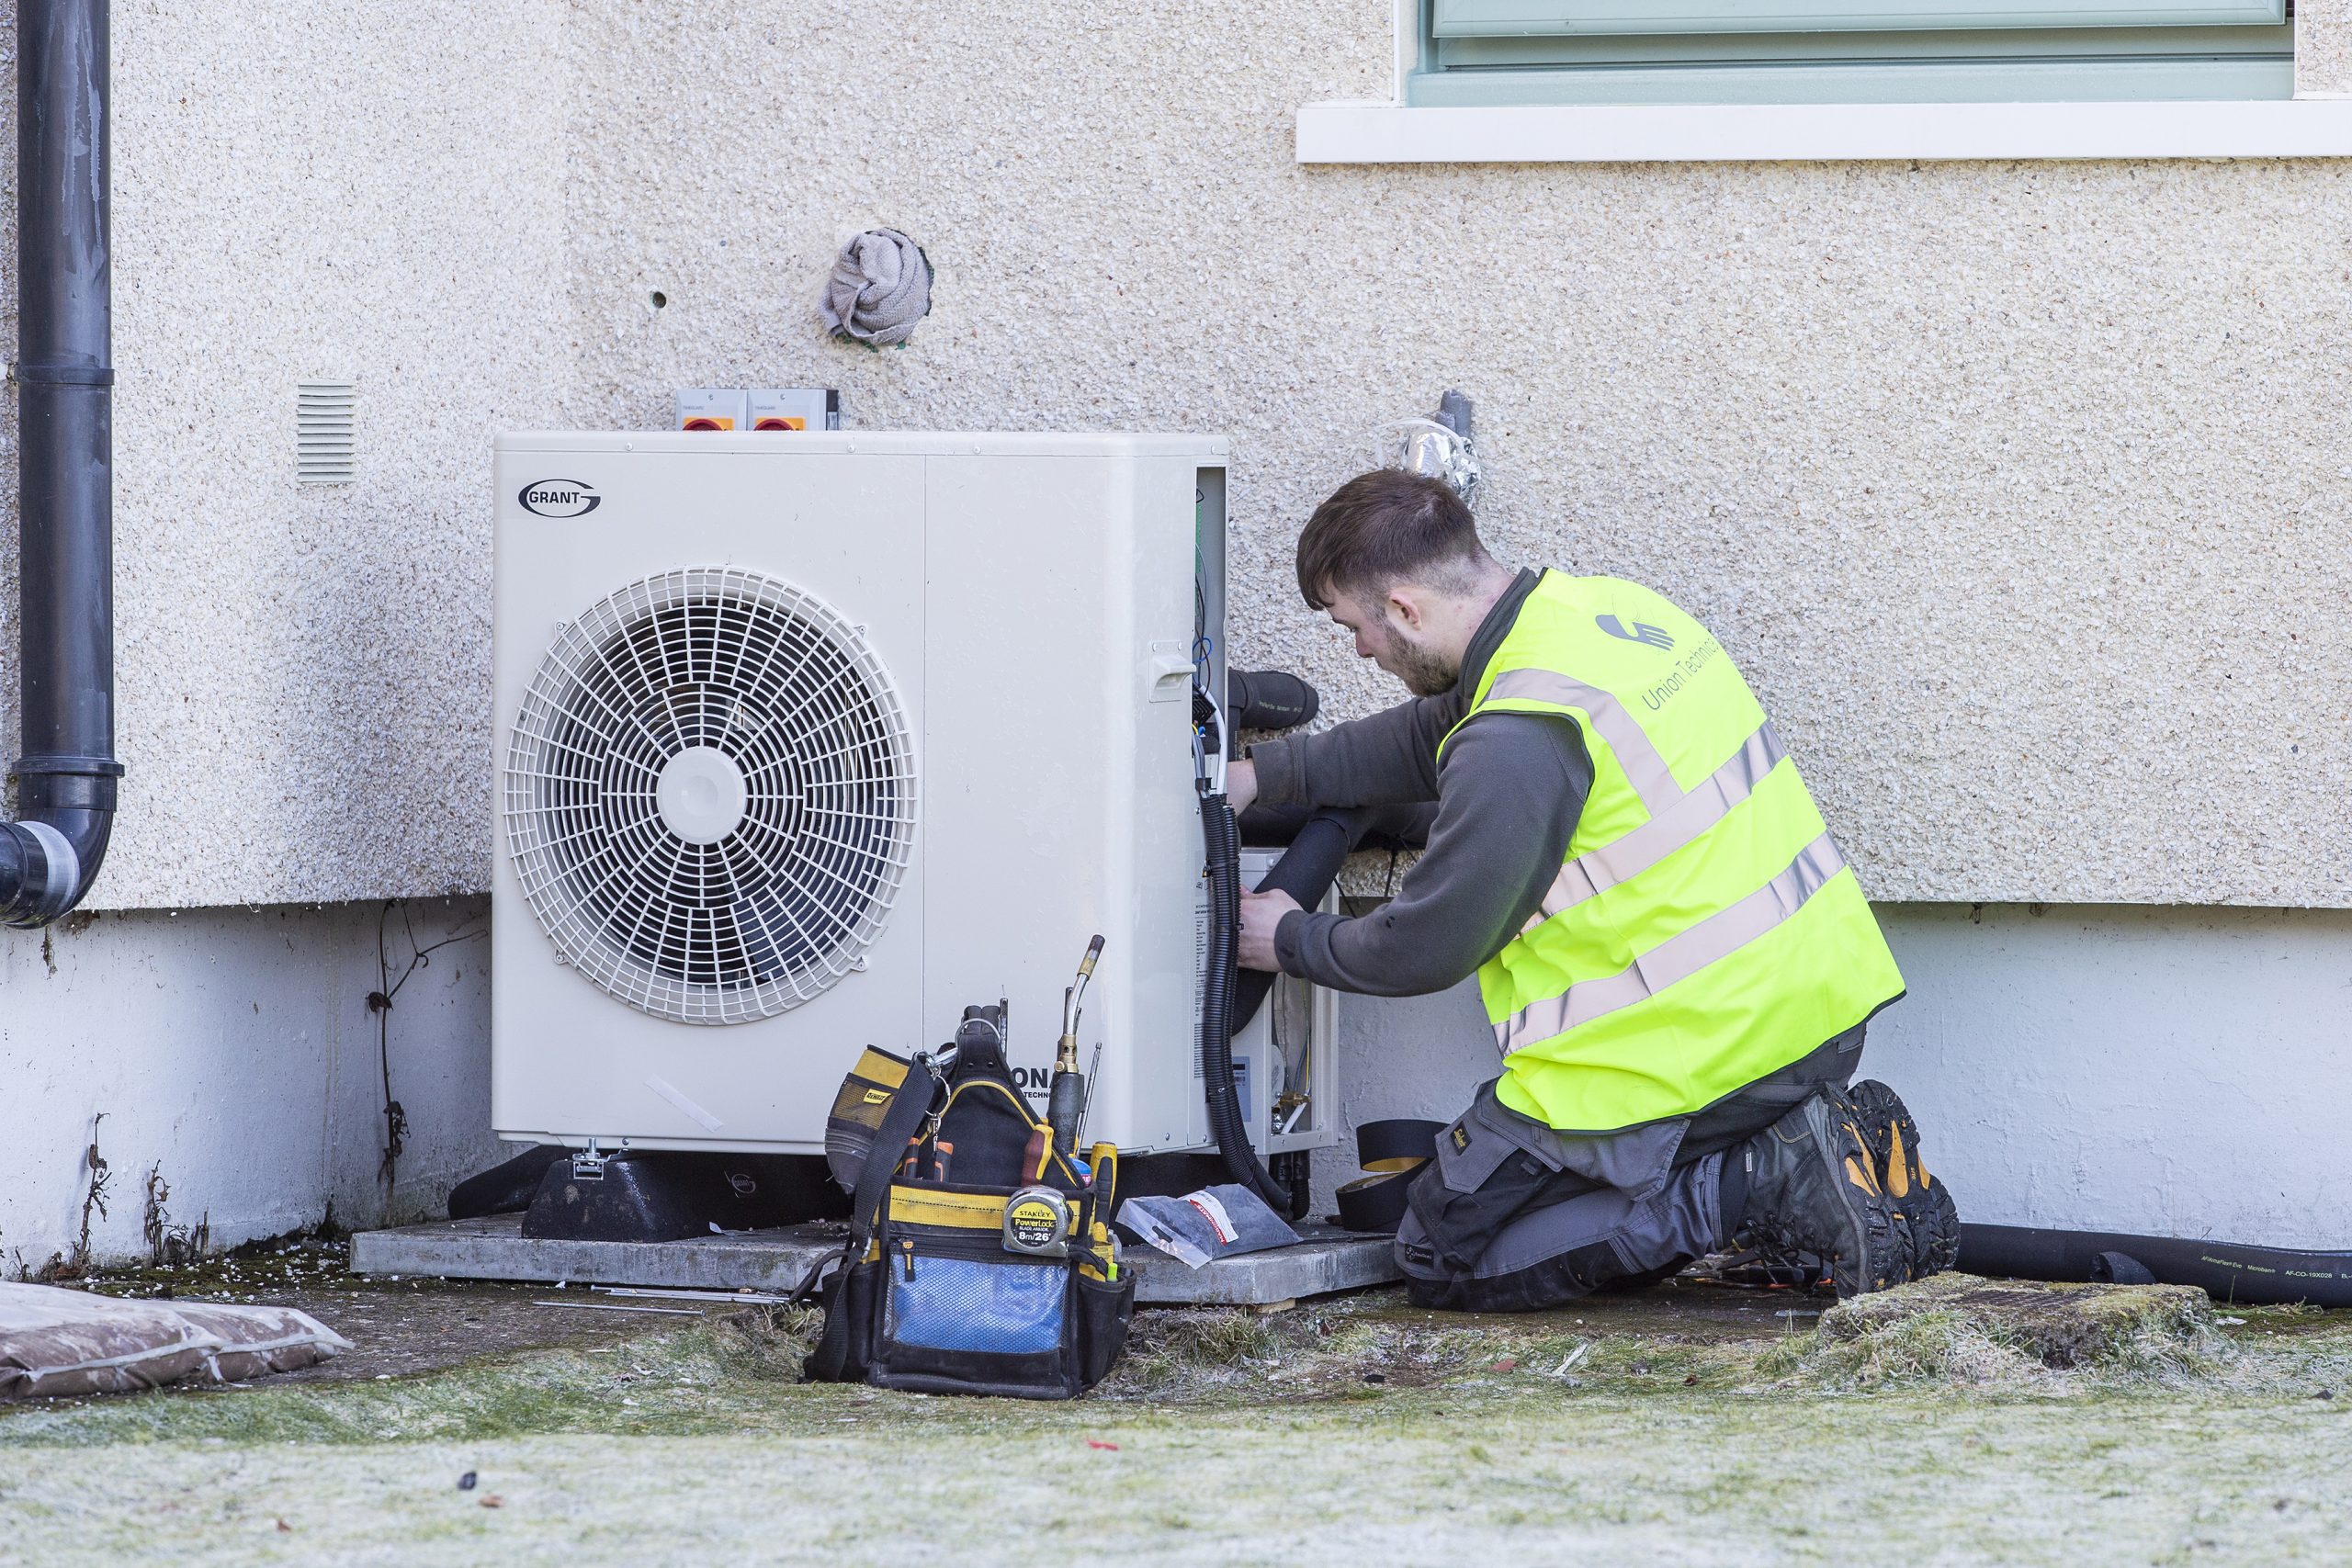 installer in high visibility jacket works on heat pump